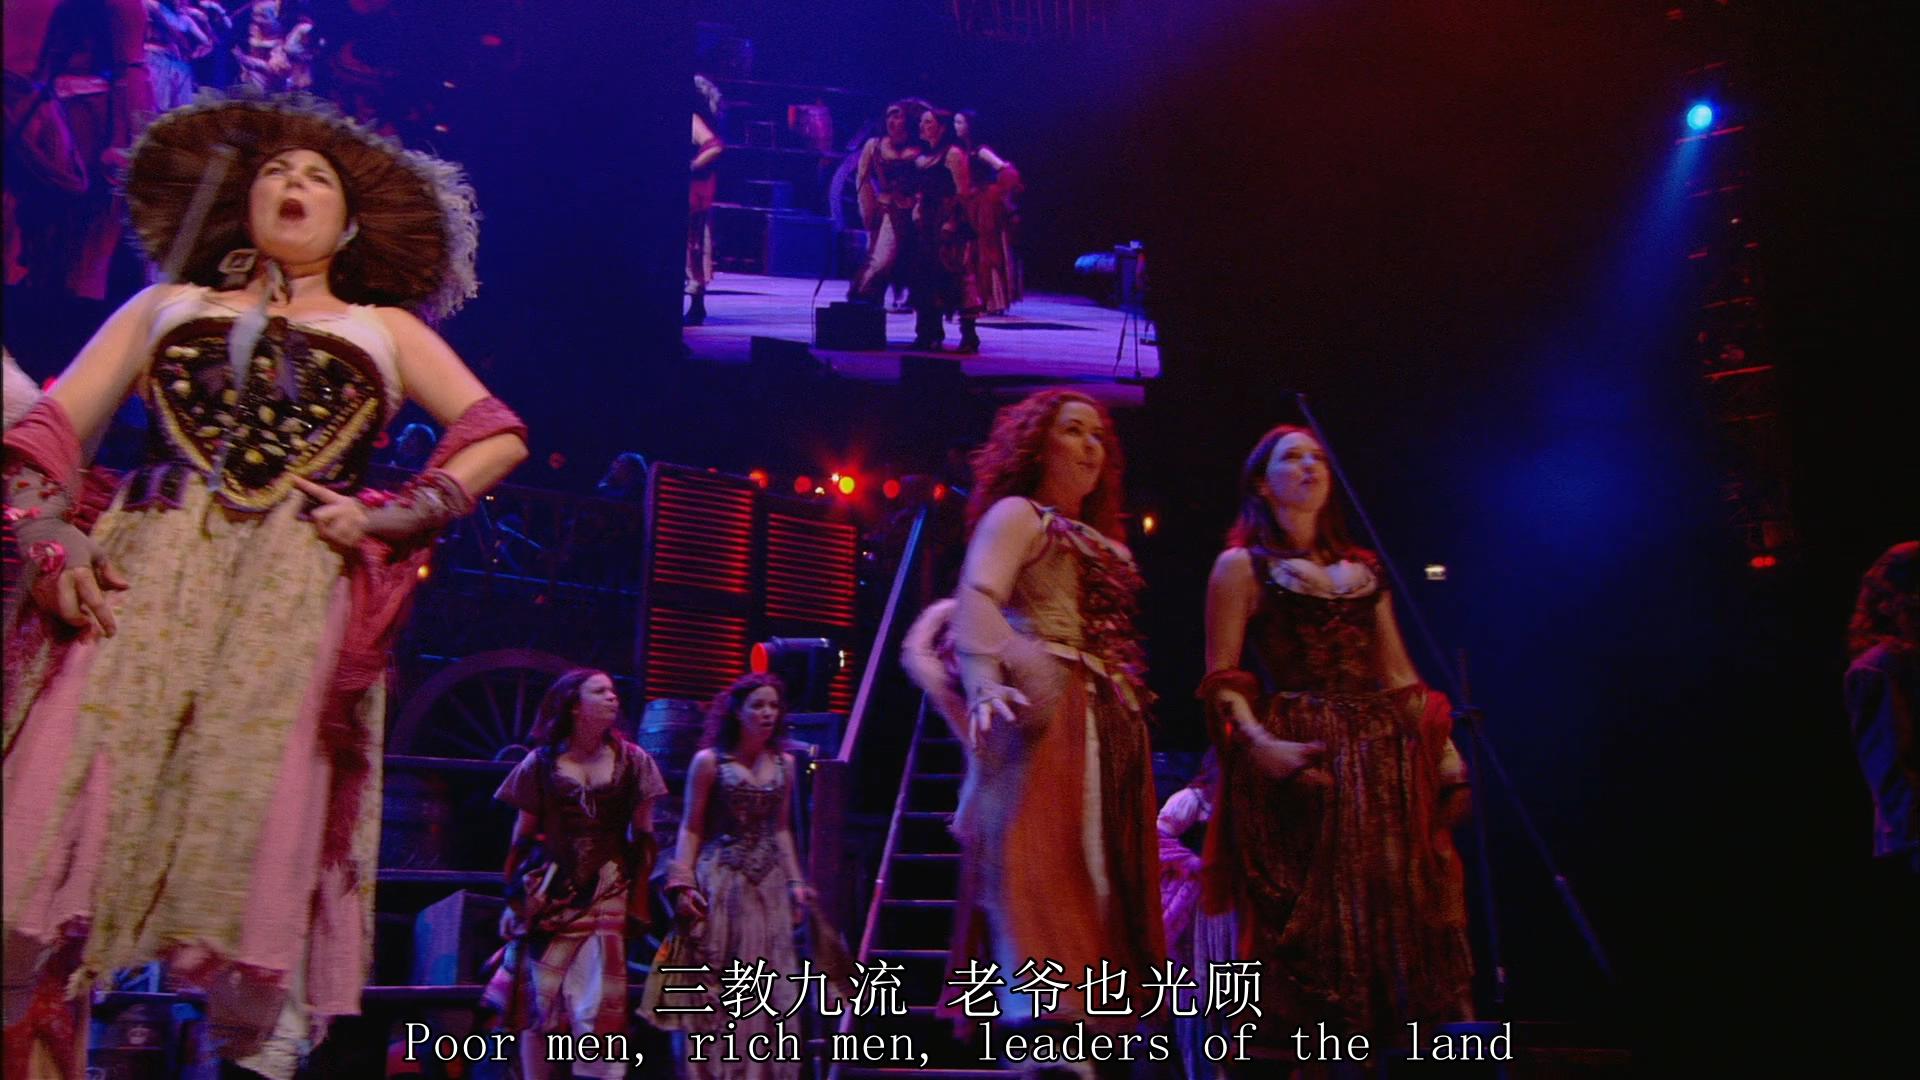 Les.Miserables.in.Concert.The.25th.Anniversary.2010.1080p.BluRay.x264.DTS-FGT_20200313133548